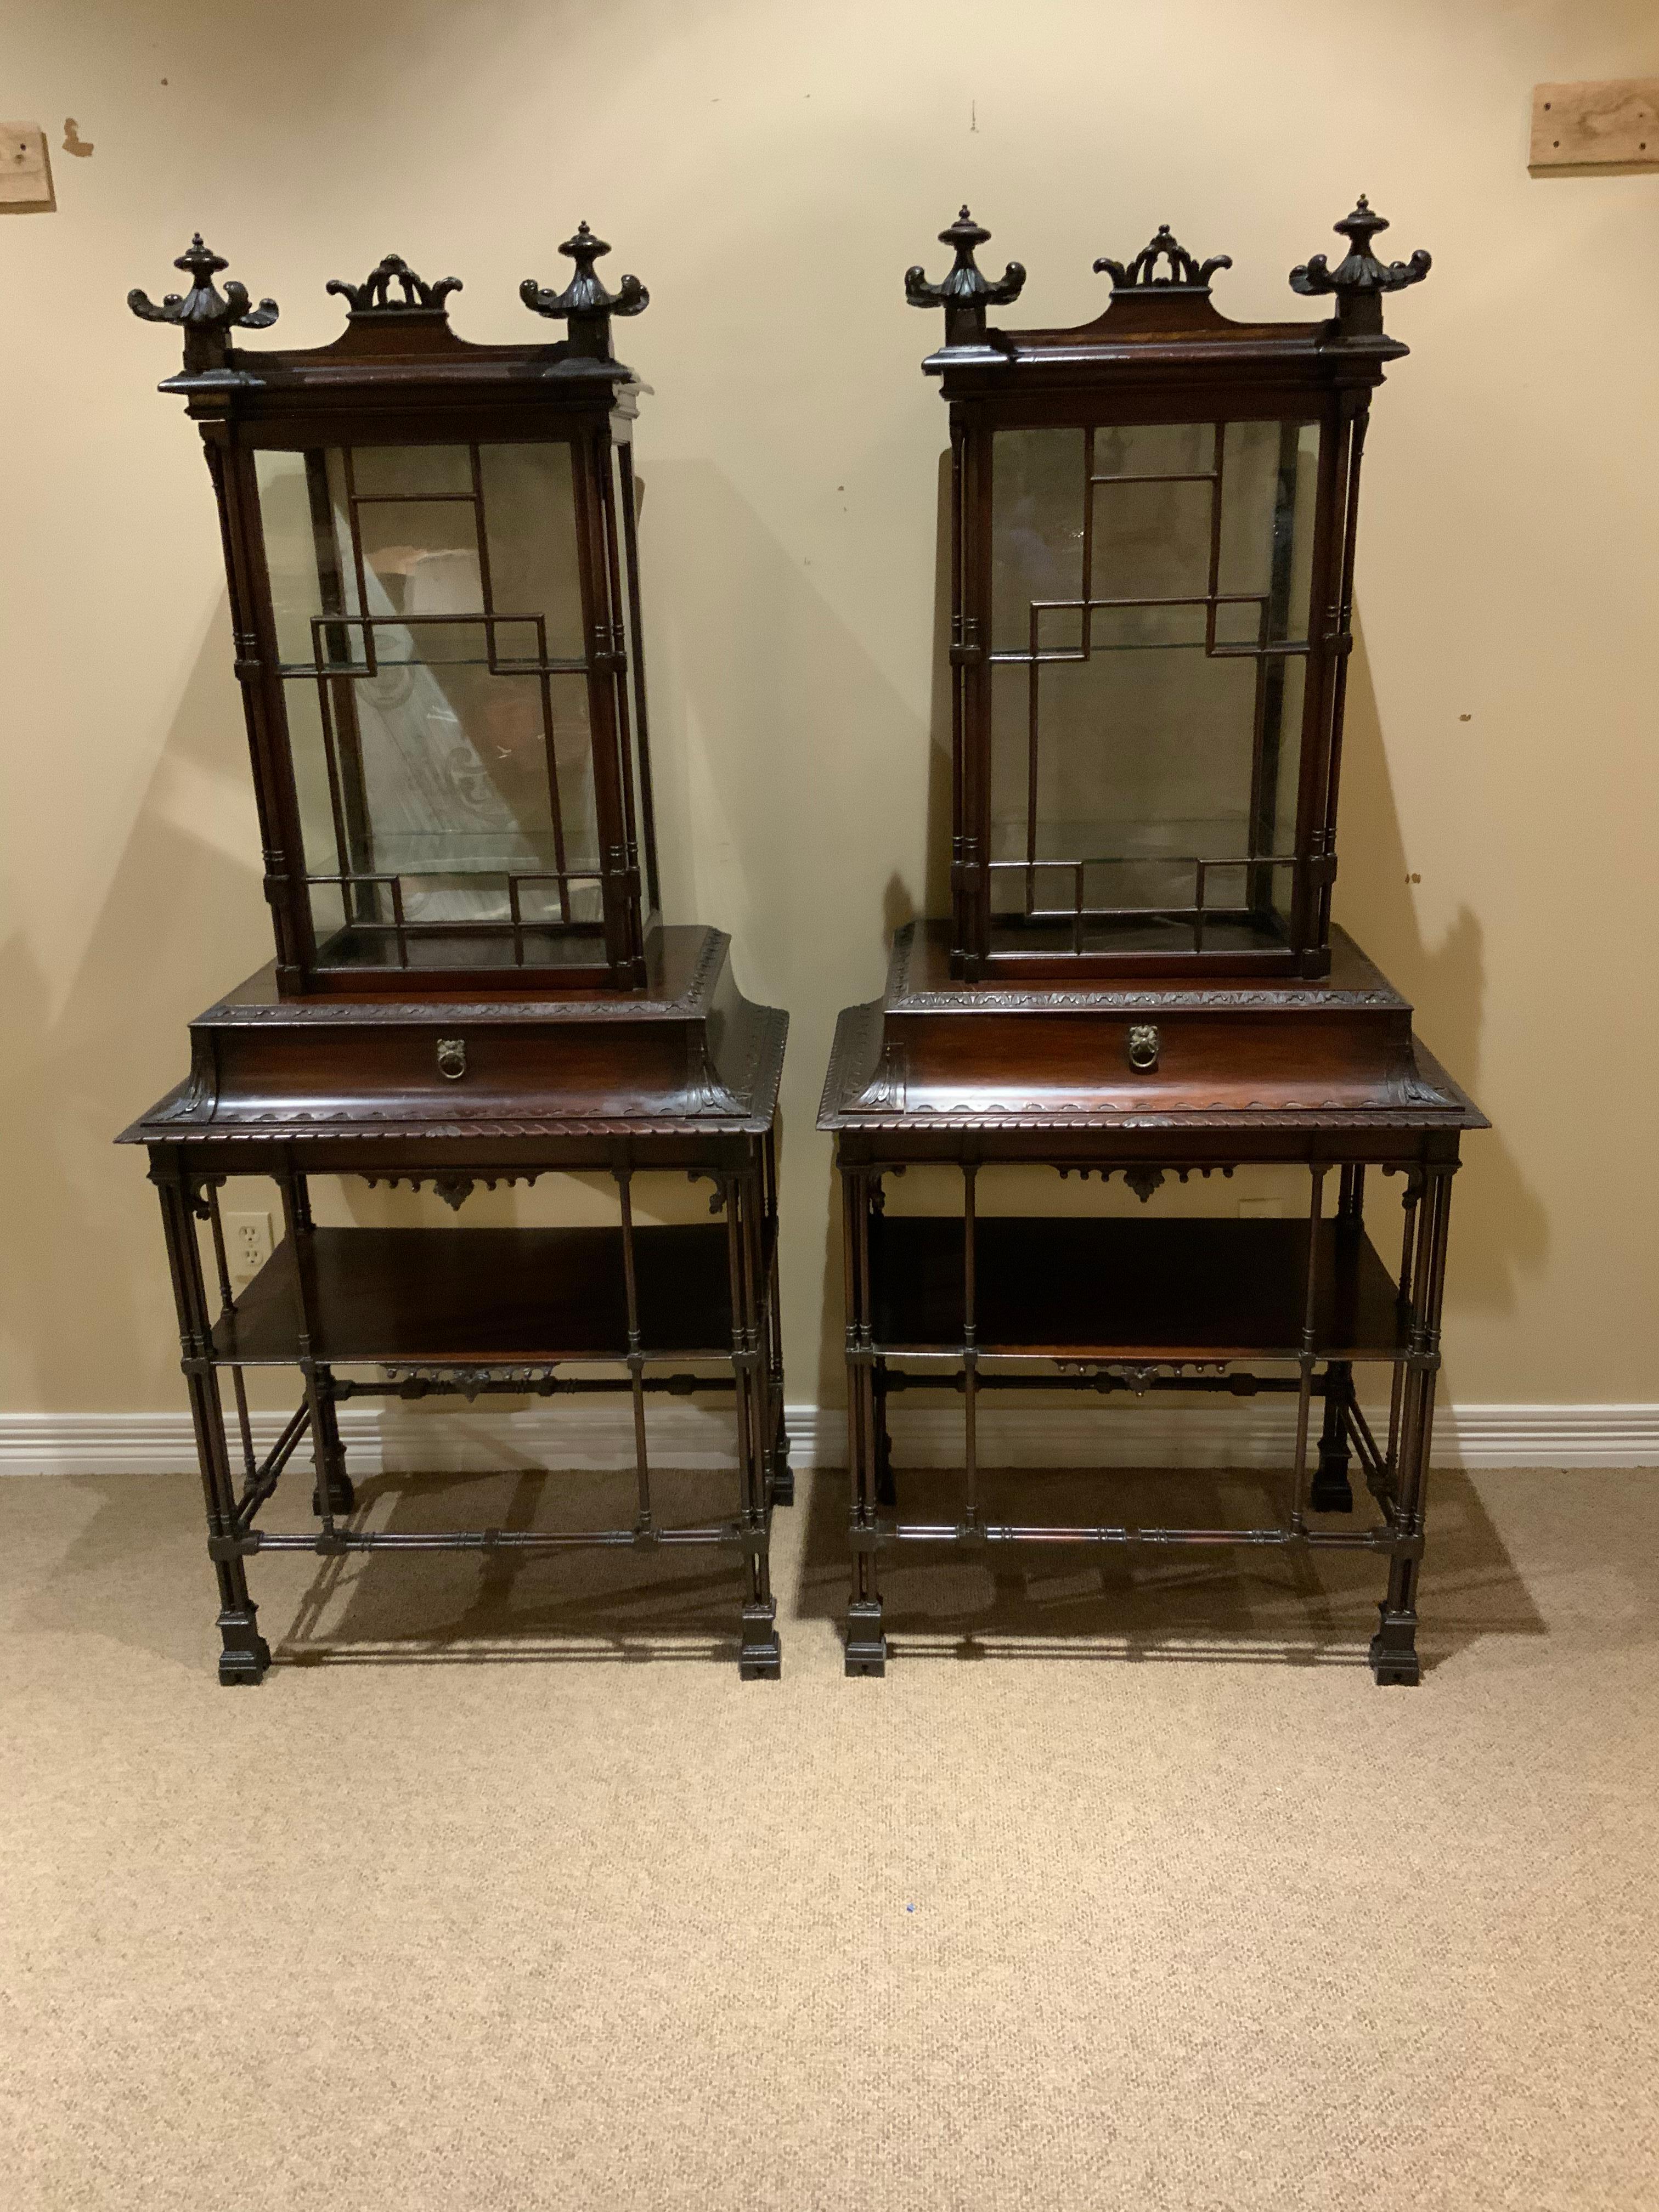 Pair of display/vitrine cabinets in the Chinese Chippendale taste, finely 
Crafted by a gifted cabinet maker in mahogany. Highly stylized and carved
With pagoda carved finials at the front crest of these impressive pieces.
Glazed on three sides